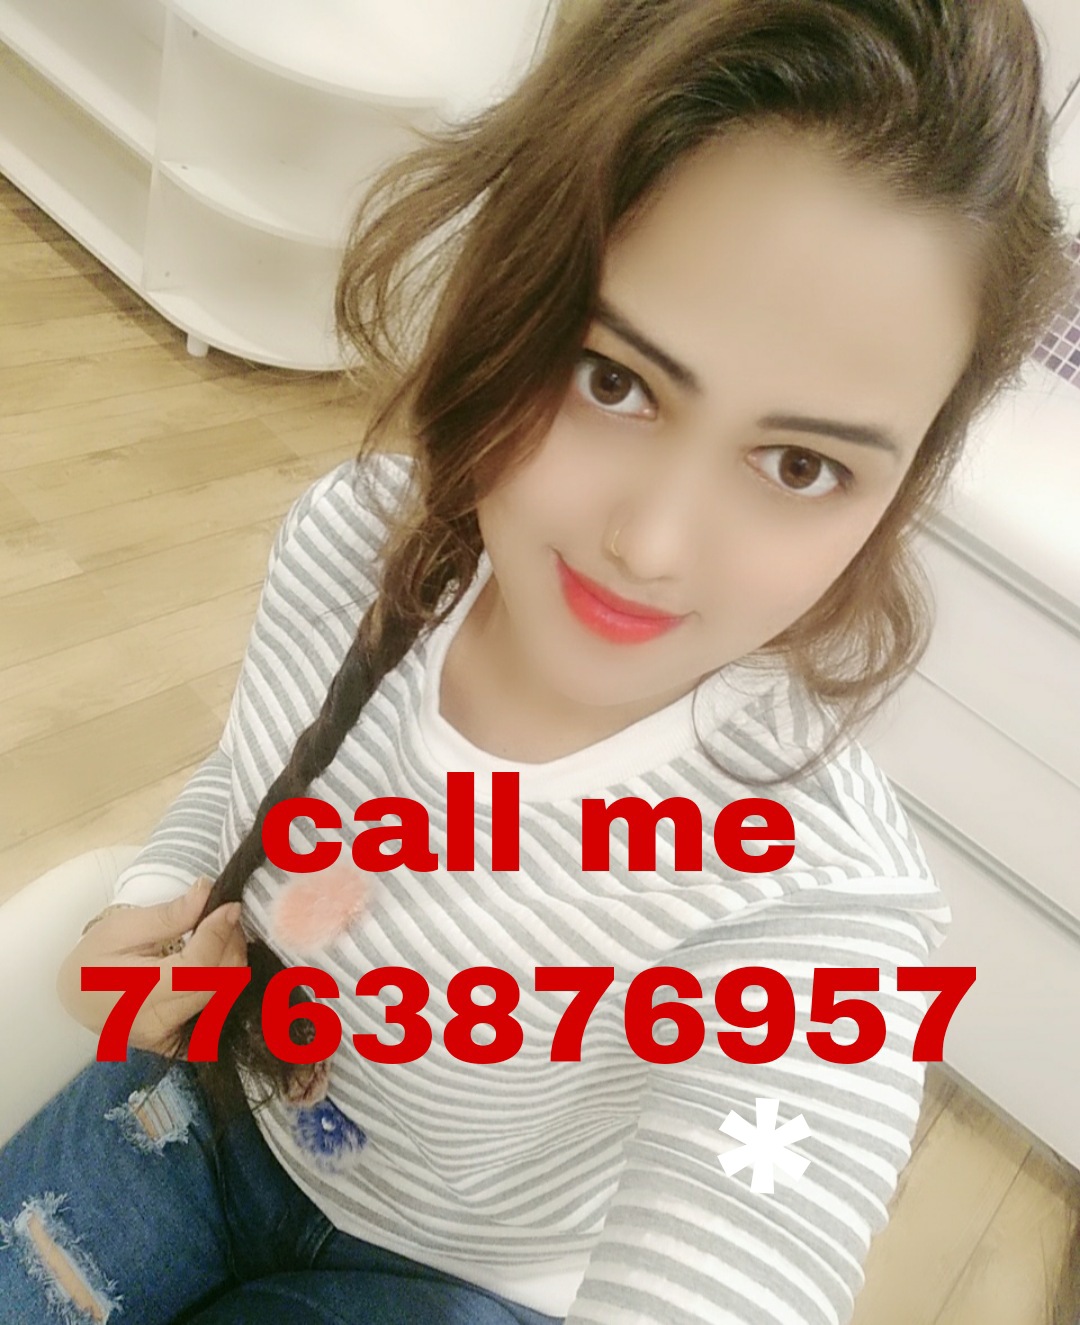 EJIPURA CALL GIRL LOW PRICE CASH PAYMENT SERVICE AVAILABLE 